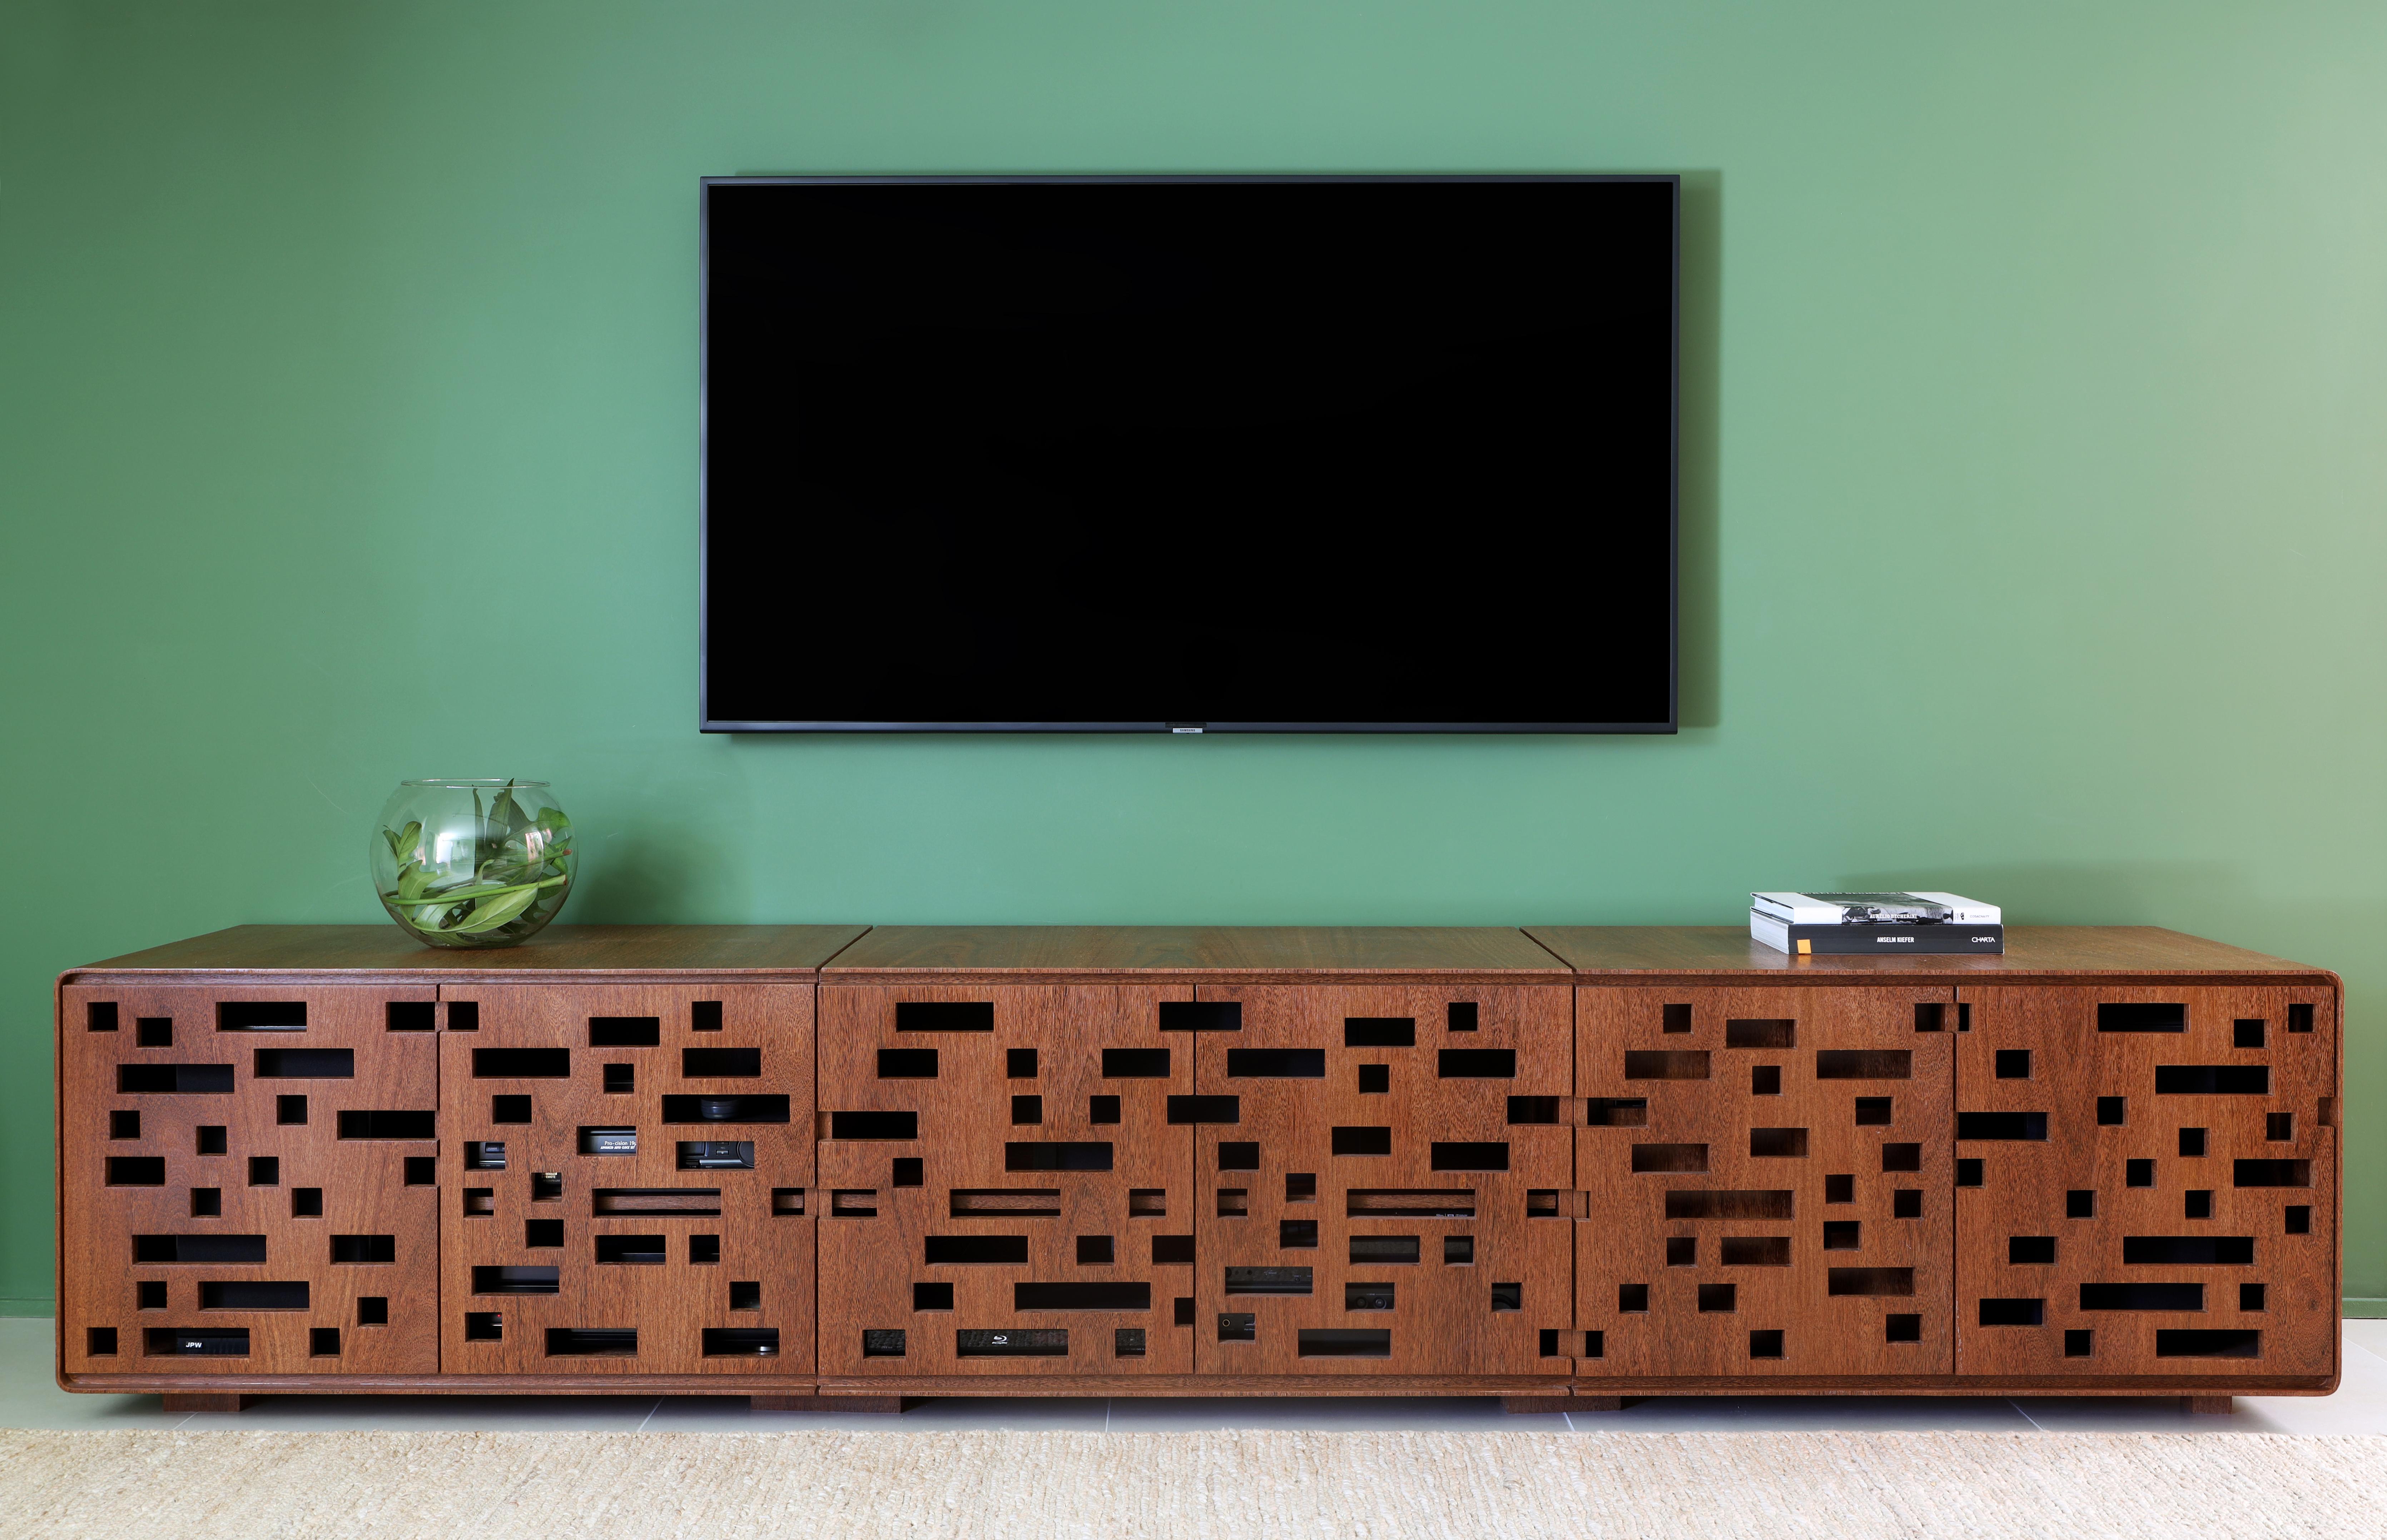 In the plenitude of timelessness, Brick Sideboard is inspired in the bricks facades worldwide. The door’s hollow cutouts have the function of providing access to the audio and video equipment, as well as ensuring the necessary ventilation for their